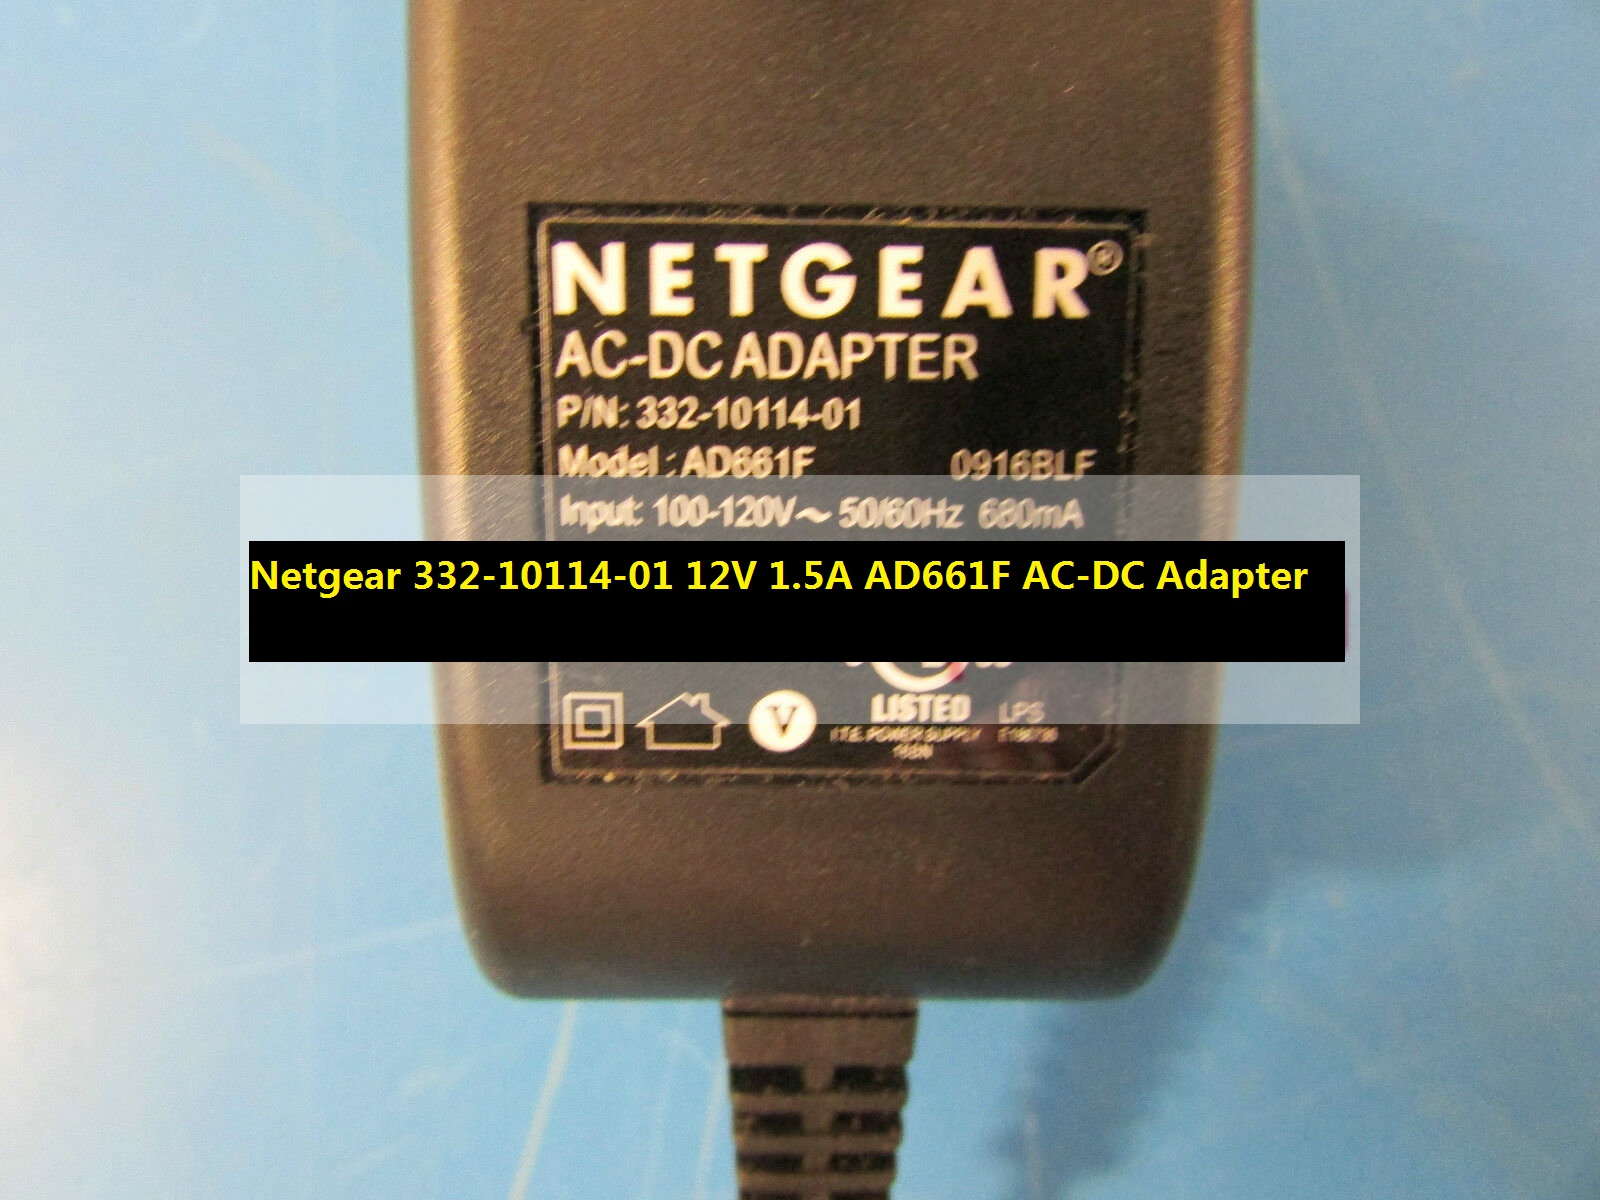 NEW Netgear 332-10114-01 12V 1.5A AD661F AC-DC Adapter Router Charger